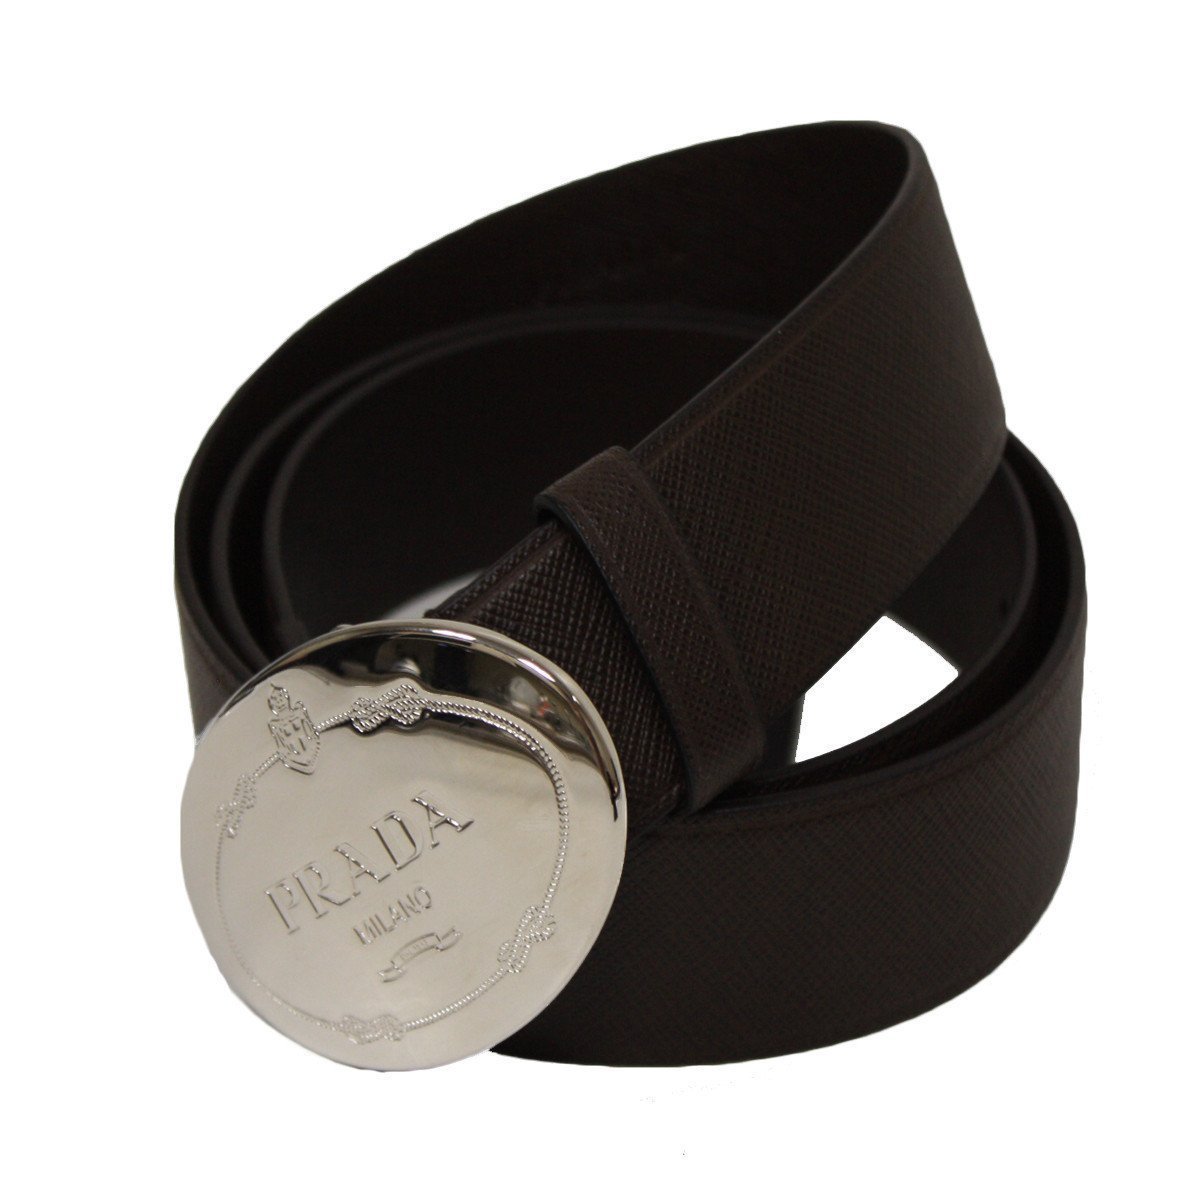 Prada Brown Saffiano Leather Belt with Silver Prada Belt Buckle 2CM046 Size 100 / 40 at_Queen_Bee_of_Beverly_Hills